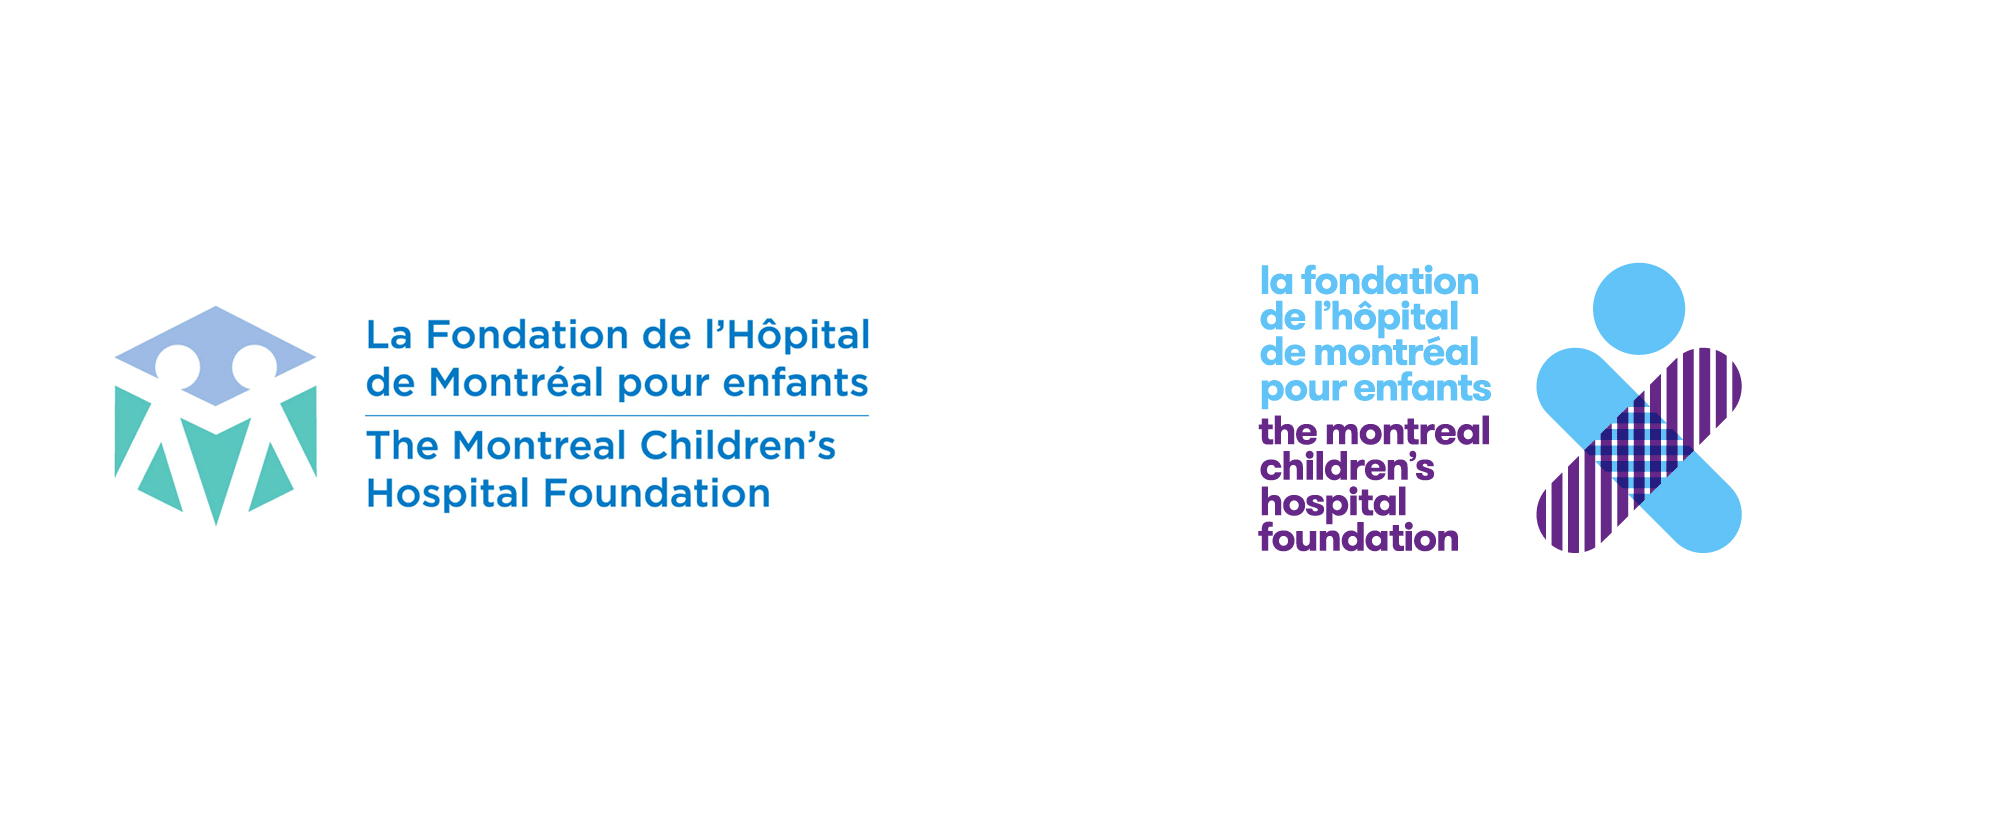 New Logo and Identity for Montreal Children’s Hospital Foundation by Cossette